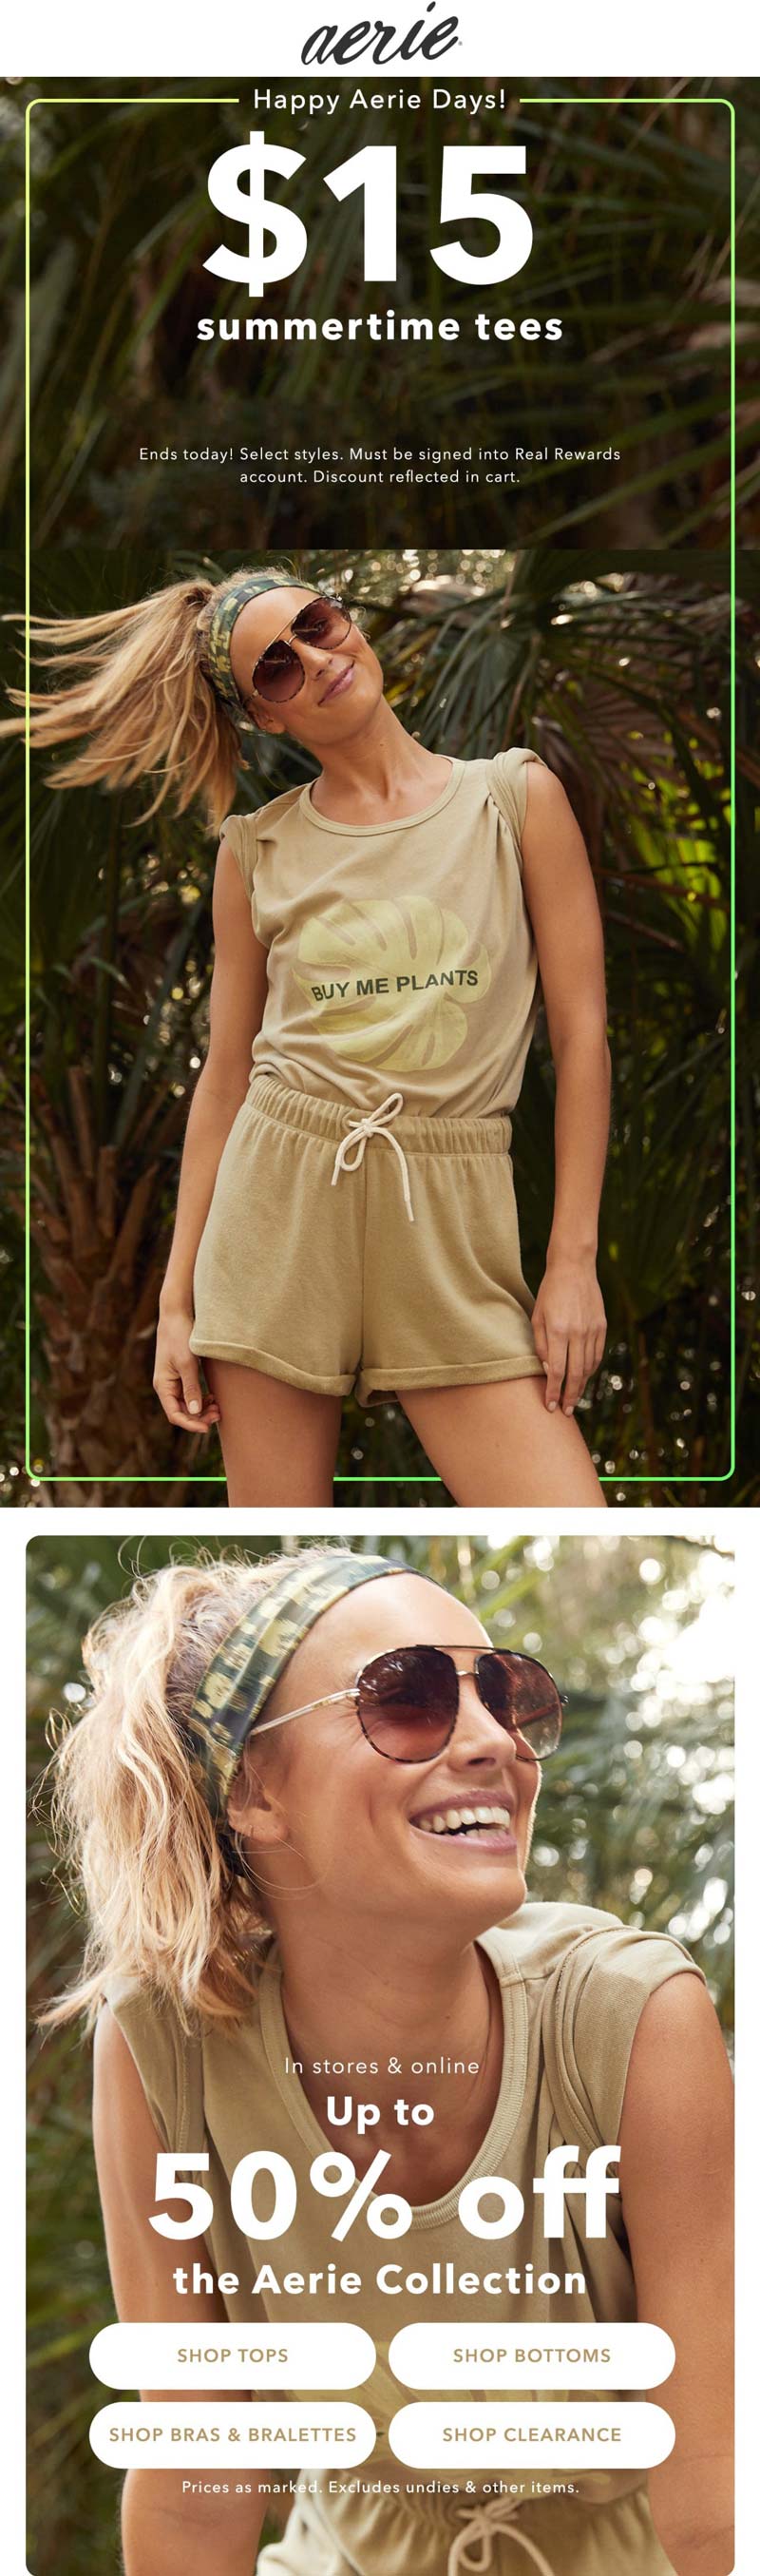 [August, 2021] 15 summertime tees today at Aerie aerie coupon & promo